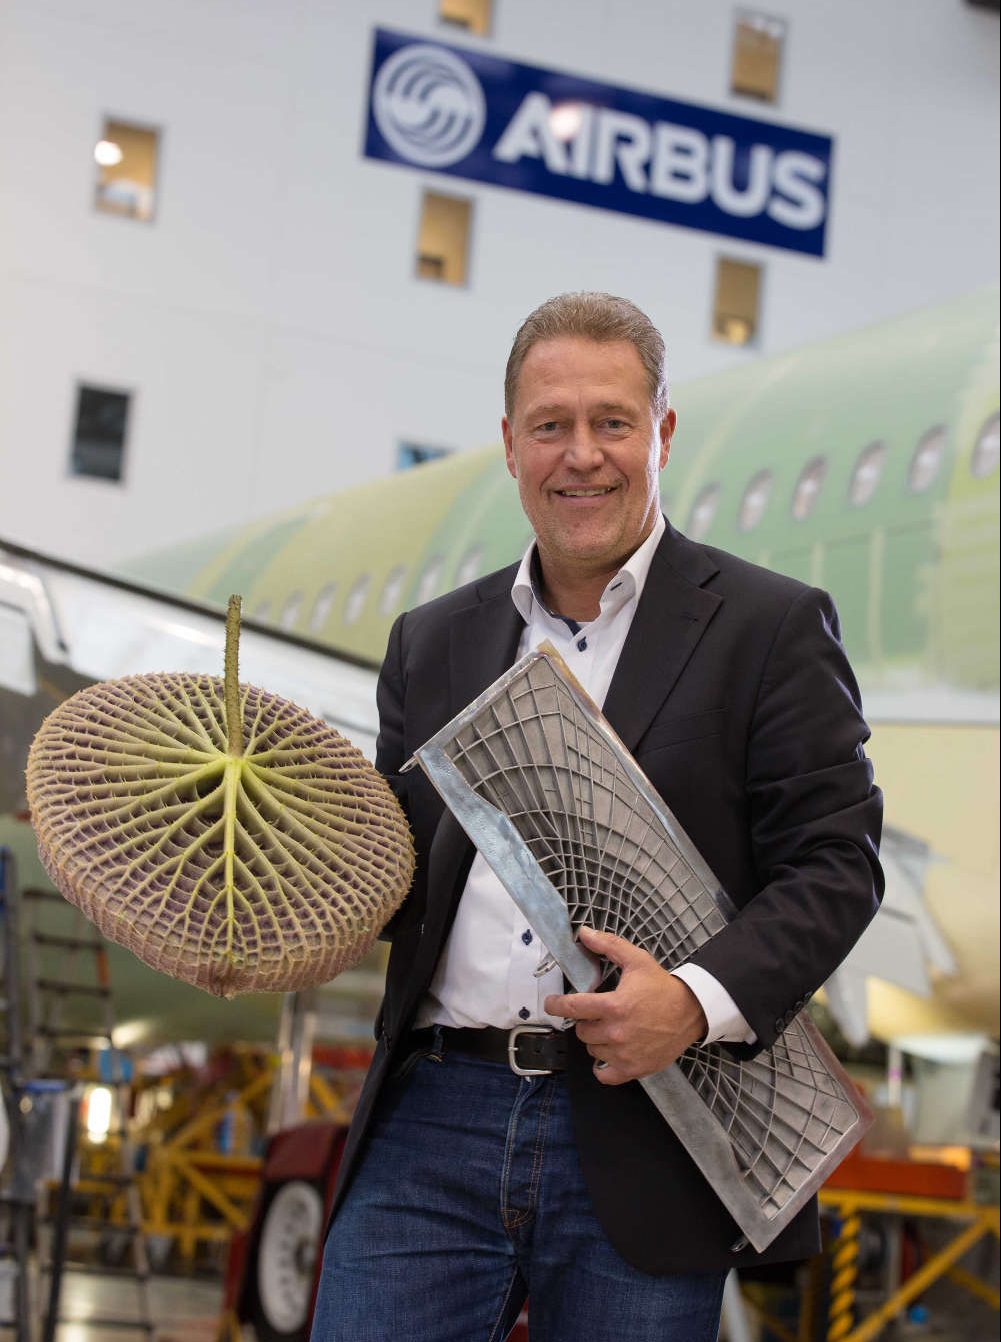 Dipl.-Ing. Peter Sander, Vice President; Manager Emerging Technologies & Concepts Germany bei der Airbus Operations GmbH | Bild: Sander